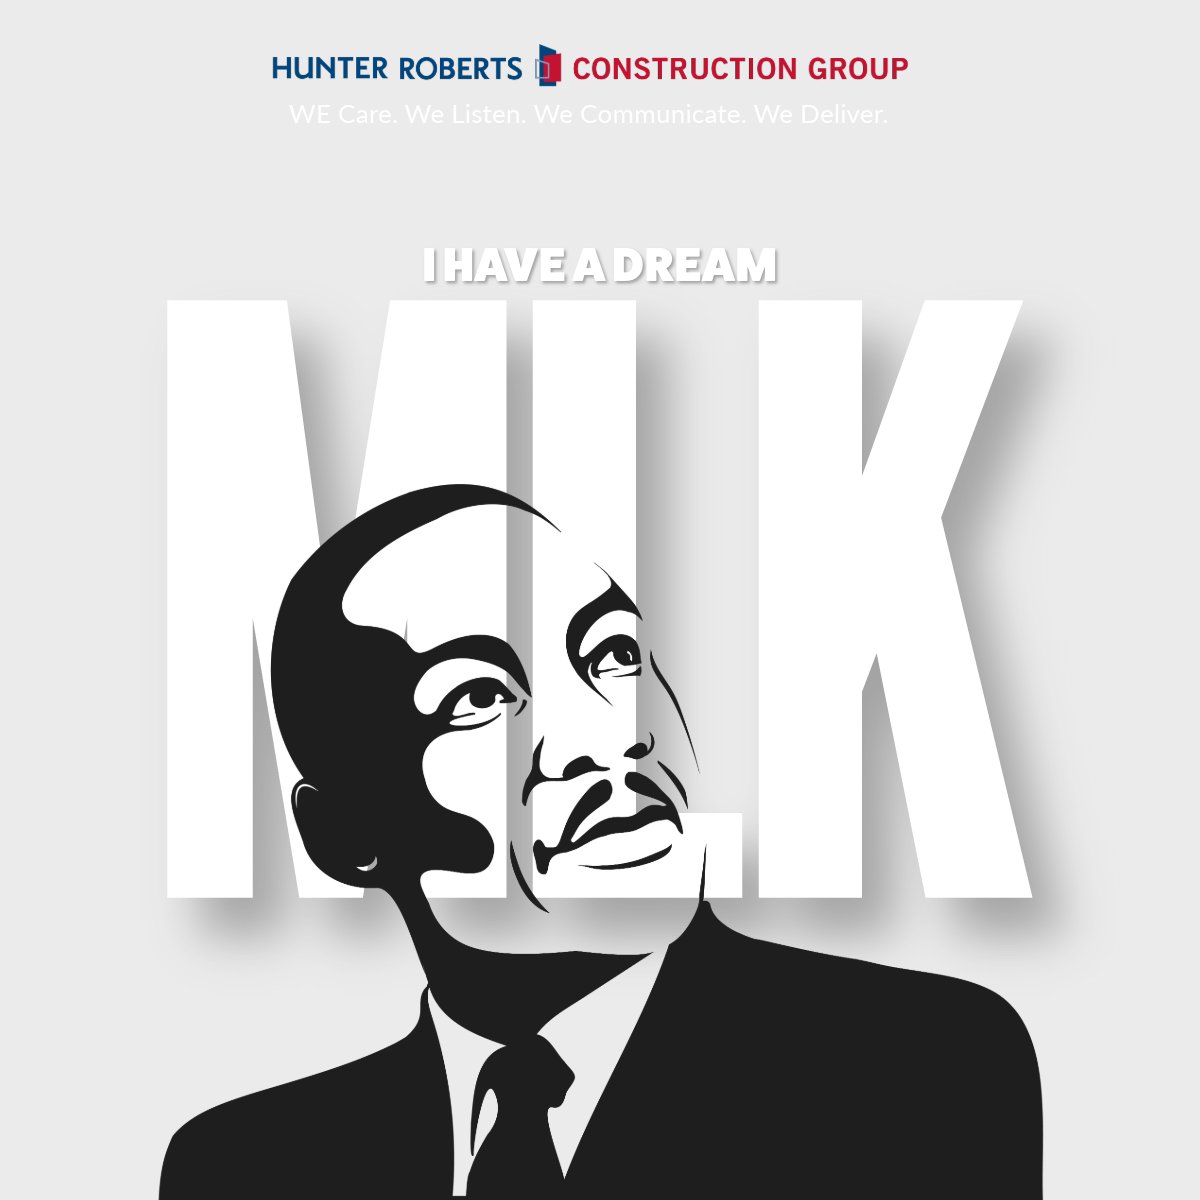 Honoring the dream, celebrating the legacy. Today, we stand united for equality and justice. Happy Martin Luther King Jr. Day! 💭🇺🇸 #MLKDay #MartinLutherKingJr #MLKService #IHaveADream #HRCG #HunterRoberts